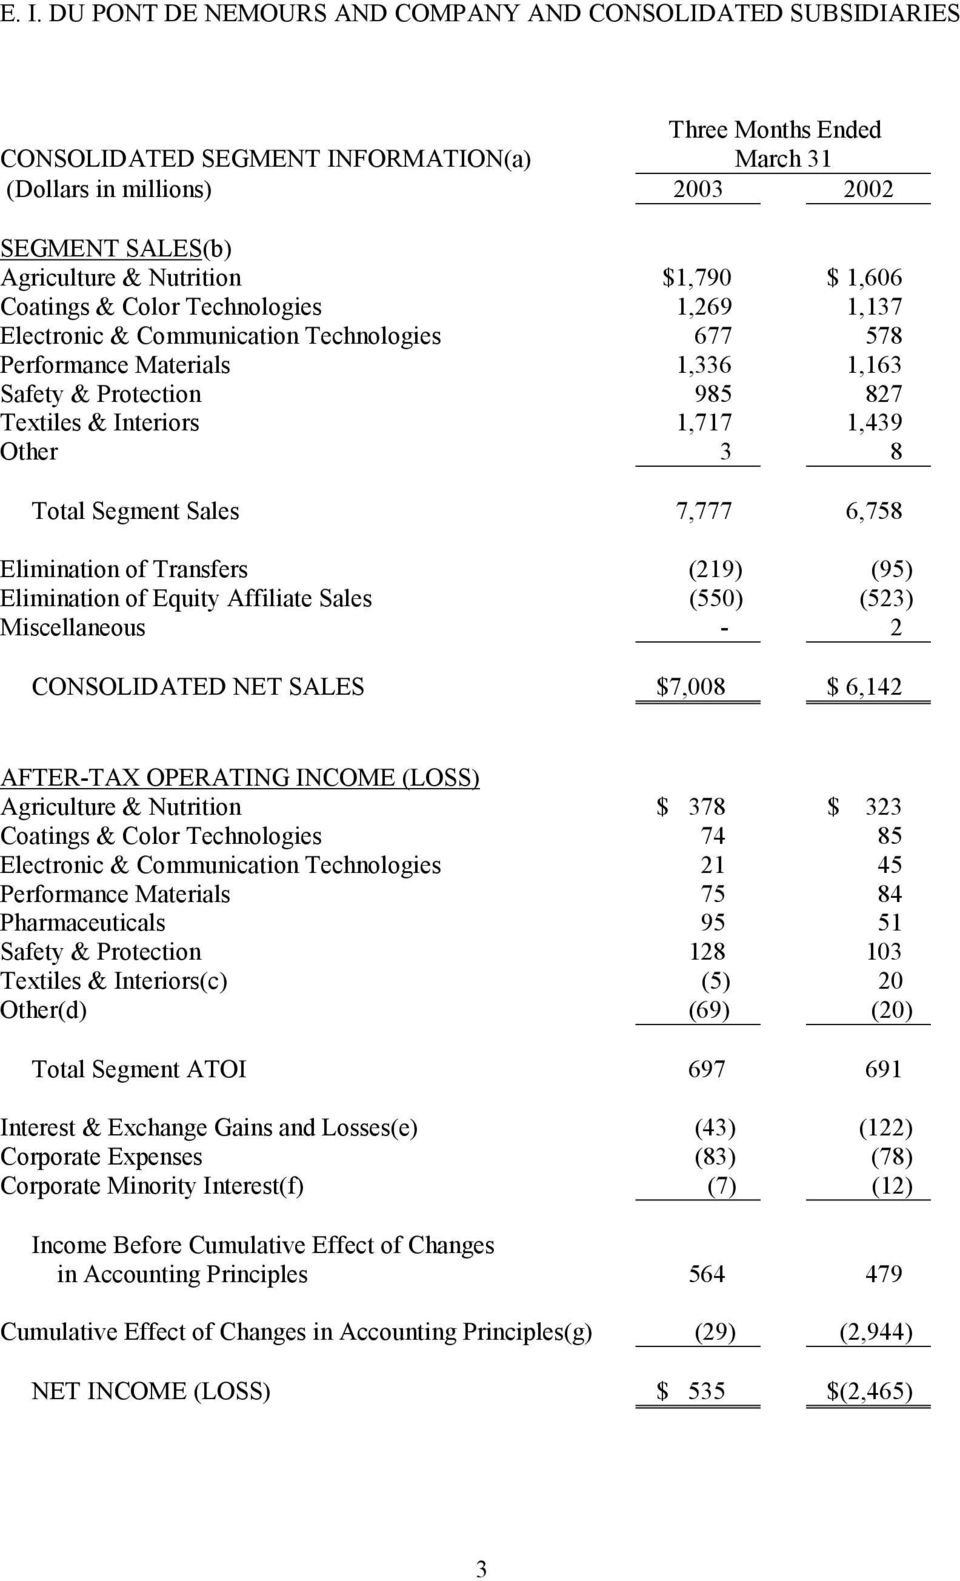 Sales 7,777 6,758 Elimination of Transfers (219) (95) Elimination of Equity Affiliate Sales (550) (523) Miscellaneous - 2 CONSOLIDATED NET SALES $7,008 $ 6,142 AFTER-TAX OPERATING INCOME (LOSS)